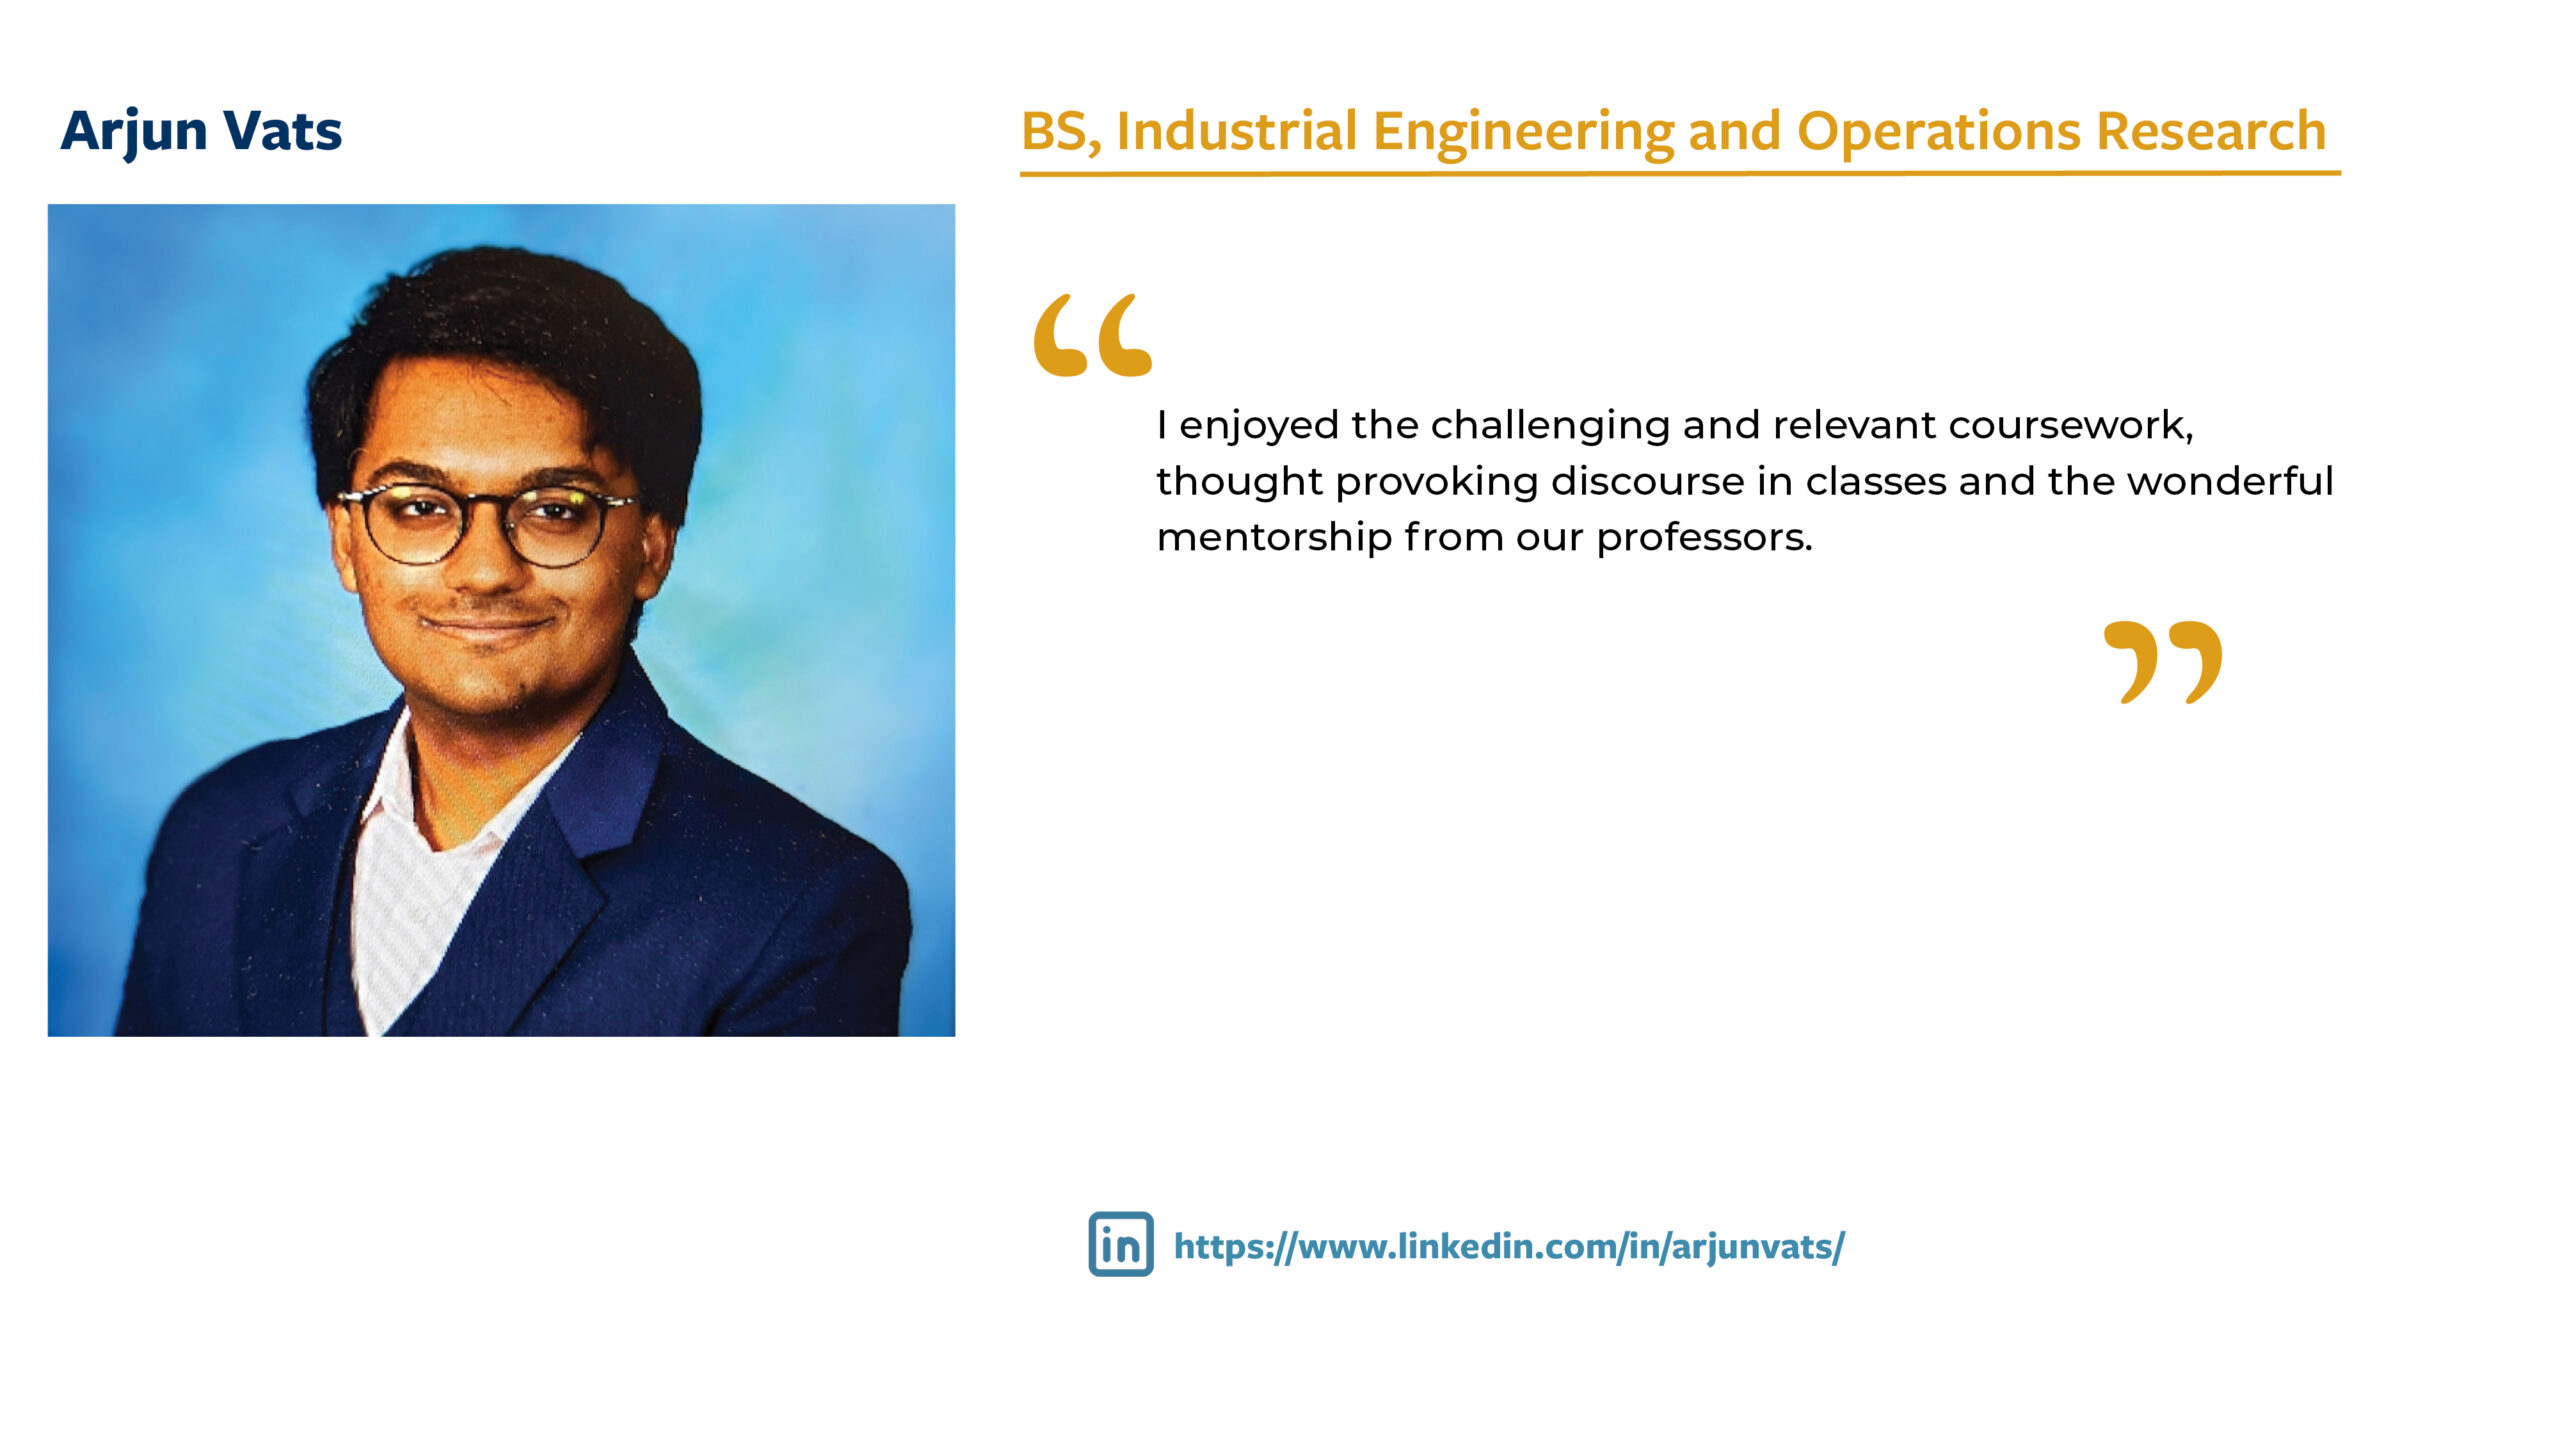 Arjun Vats BS IEOR 2023 grad photo and quote